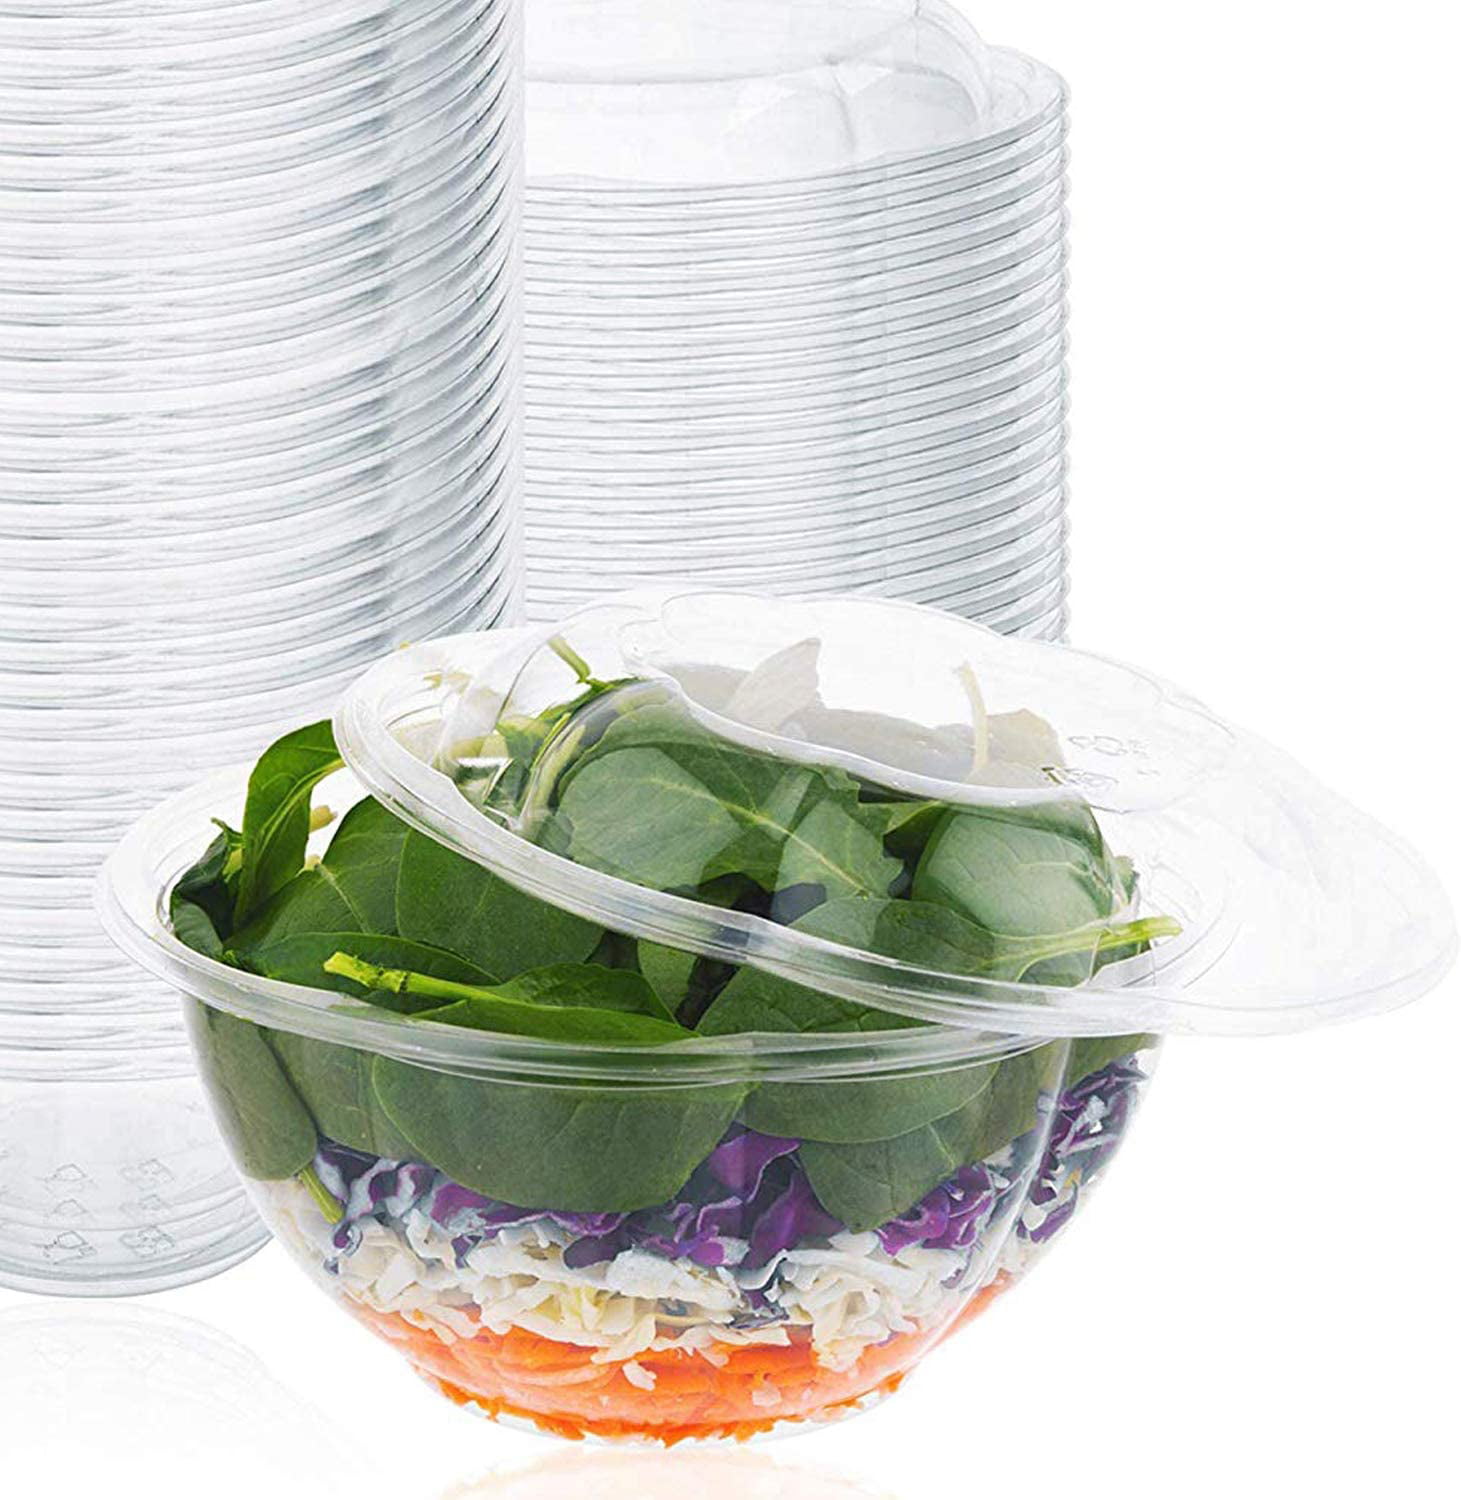 48 oz Disposable BPA Free Salad Containers with Lids inClear Plastic  Disposable for a Fresh Airtight Seal, Portable Serving Bowl Set for Meal  Prep 